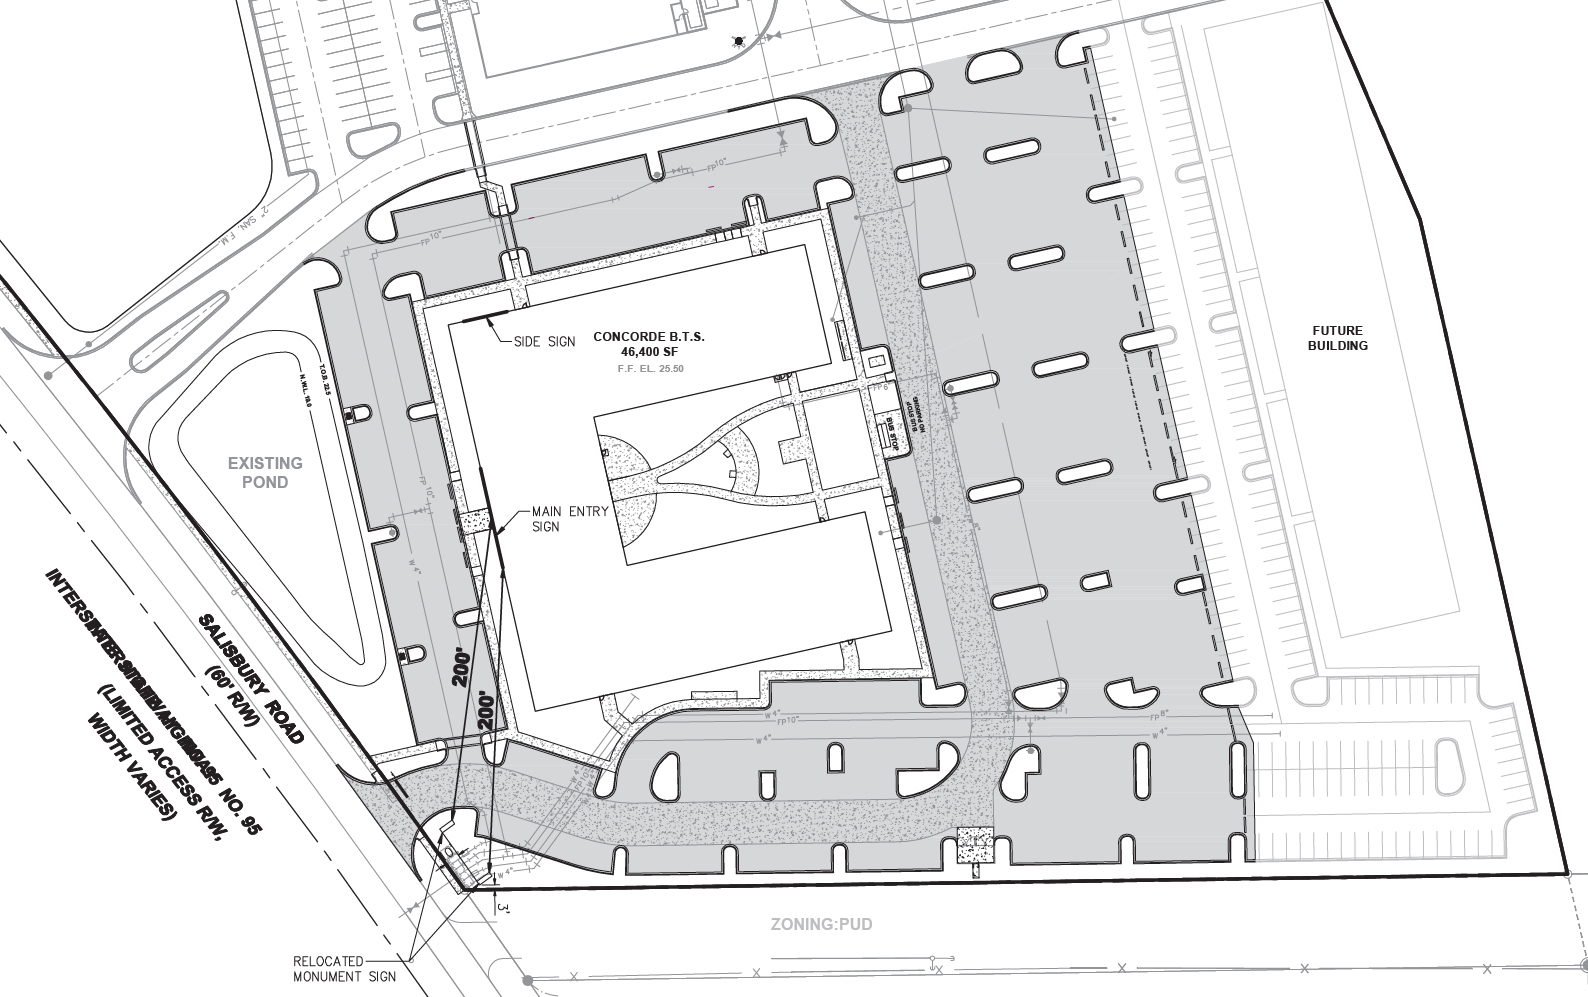 The site plan of Salisbury Business Park with the location of the proposed building construction.